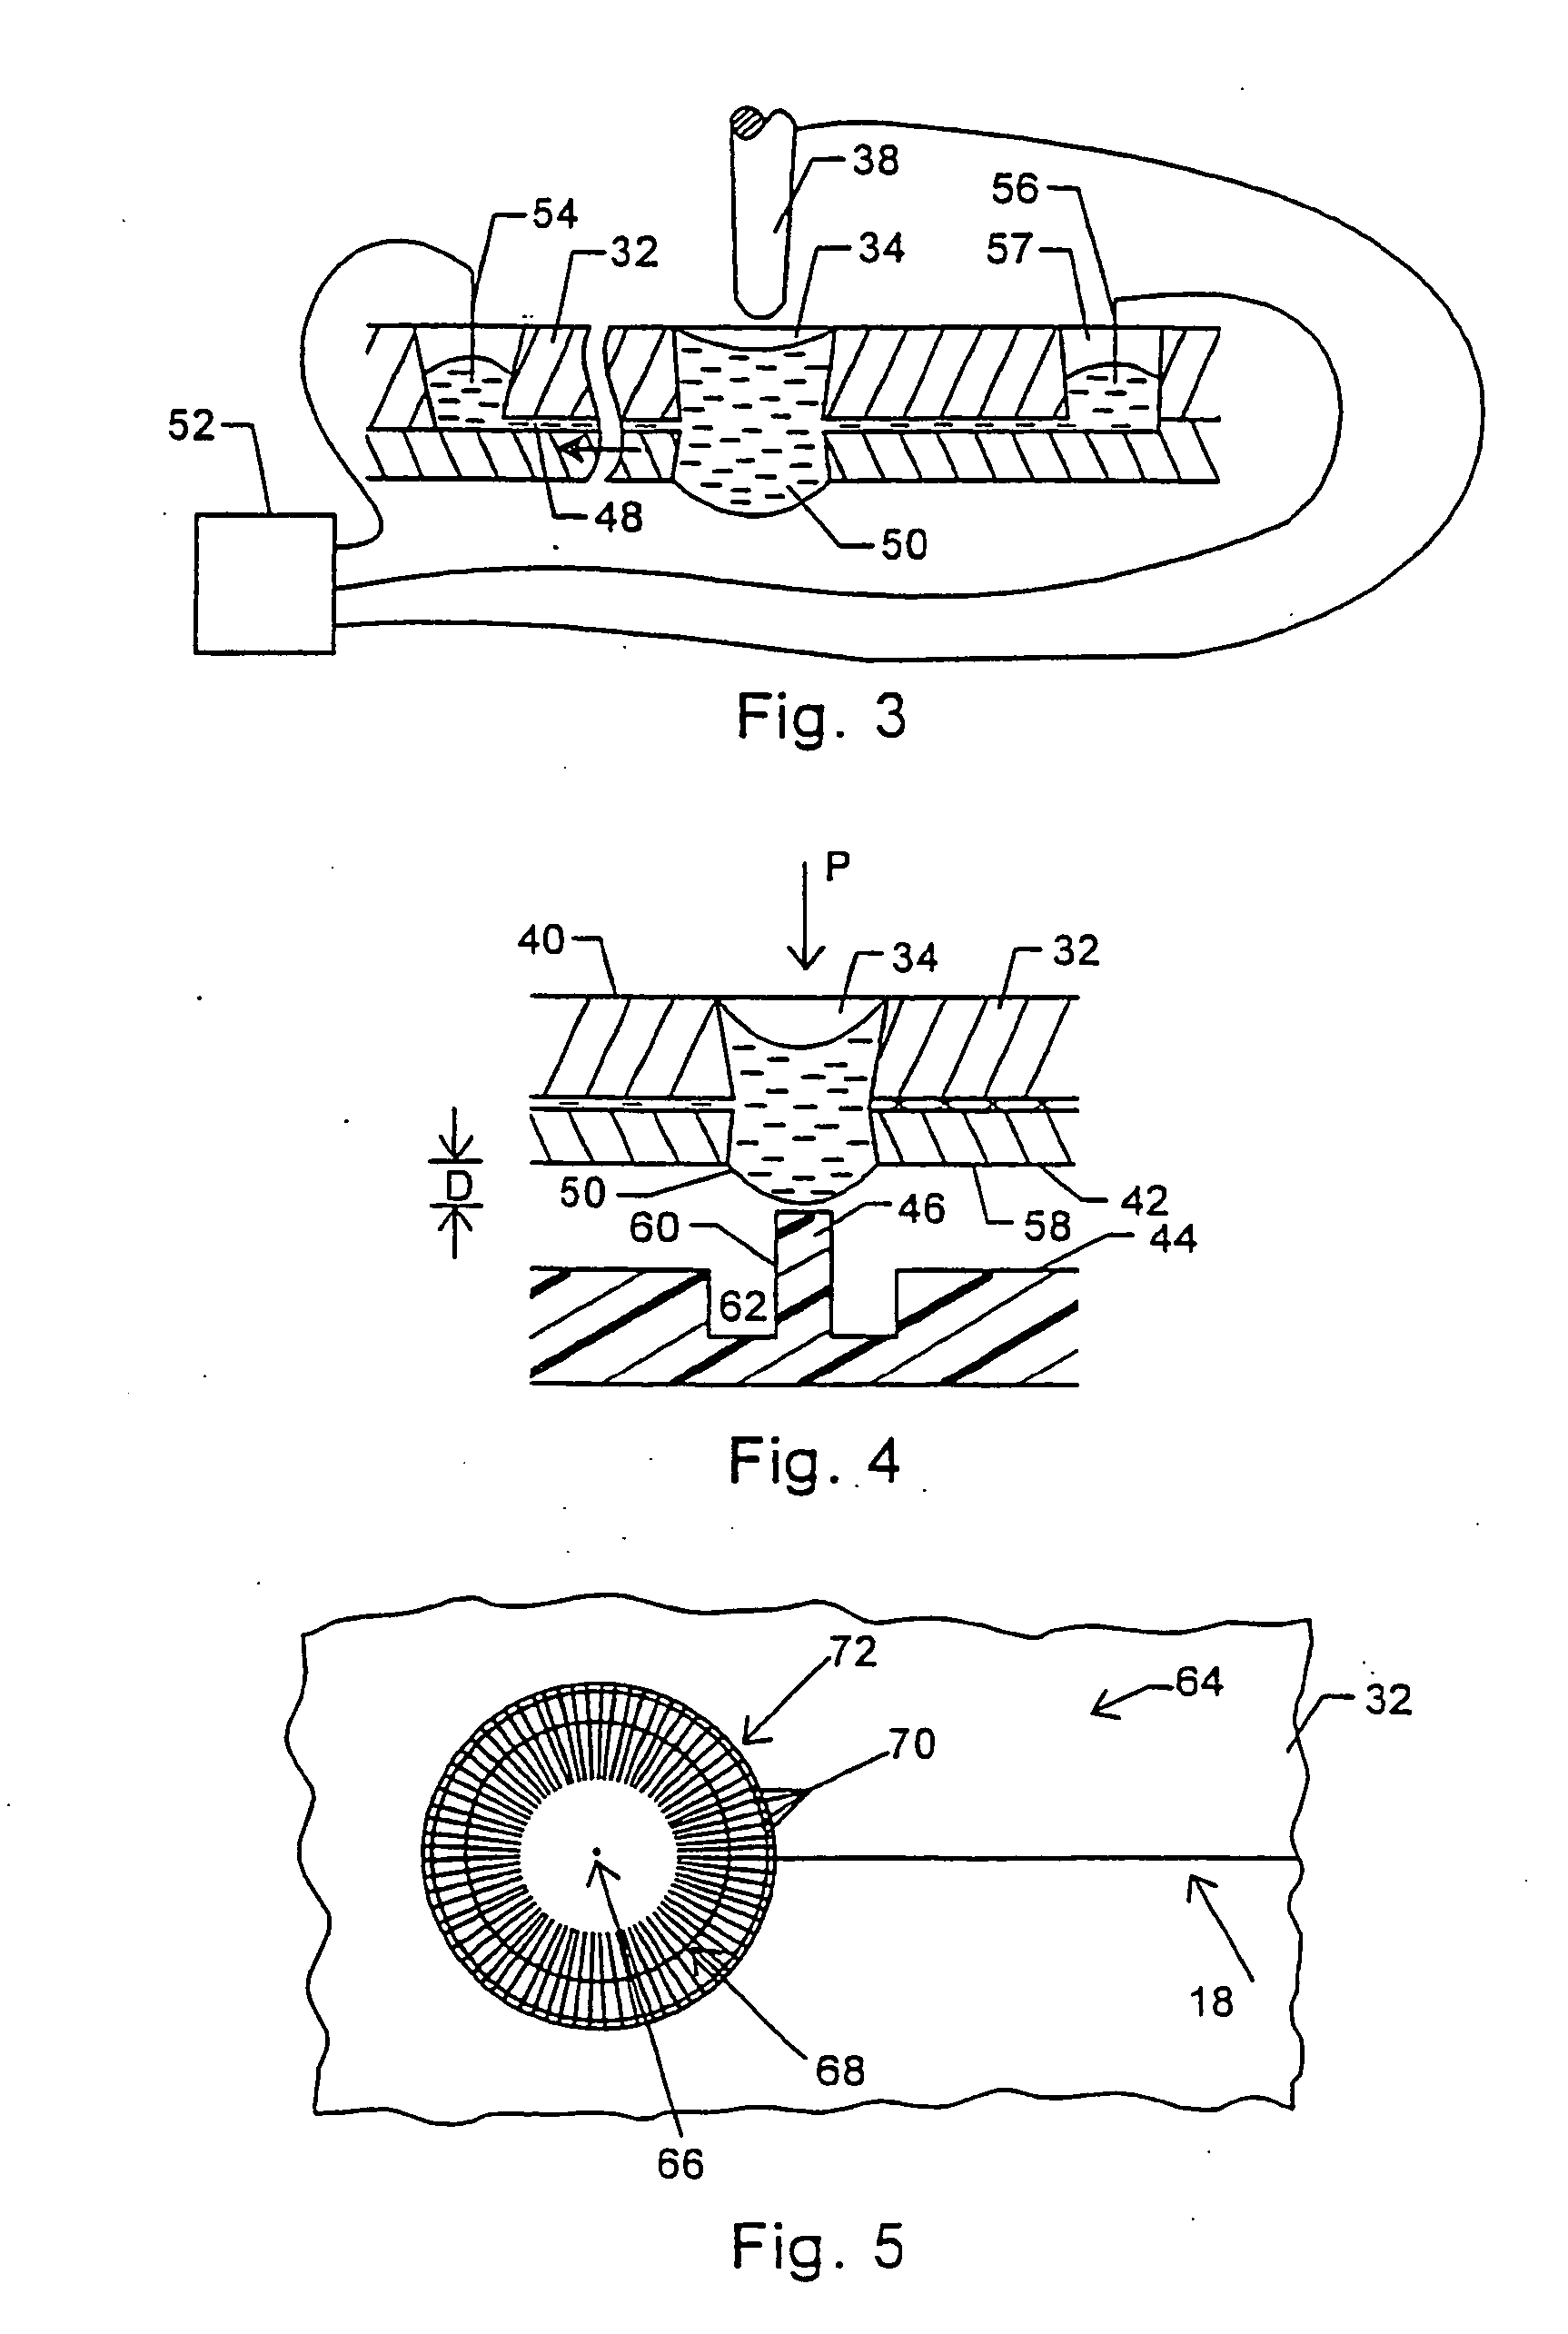 Microfabricated structures for facilitating fluid introduction into microfluidic devices